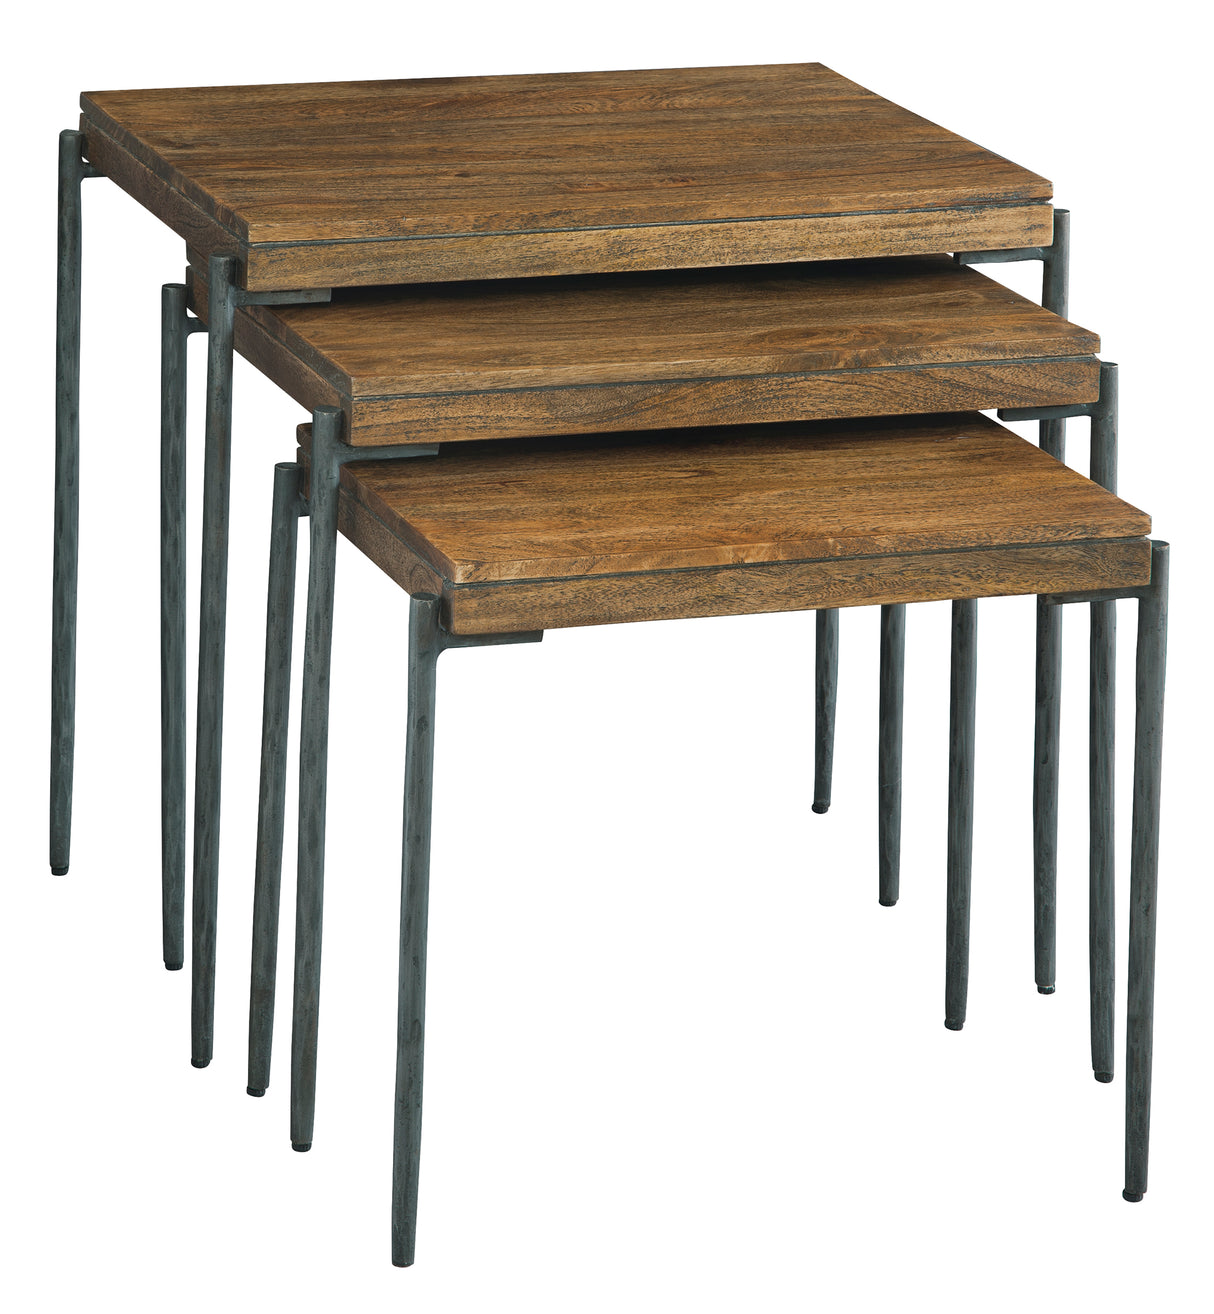 Hekman 23710 Bedford Park 24in. x 18in. x 25in. Nest Of Tables